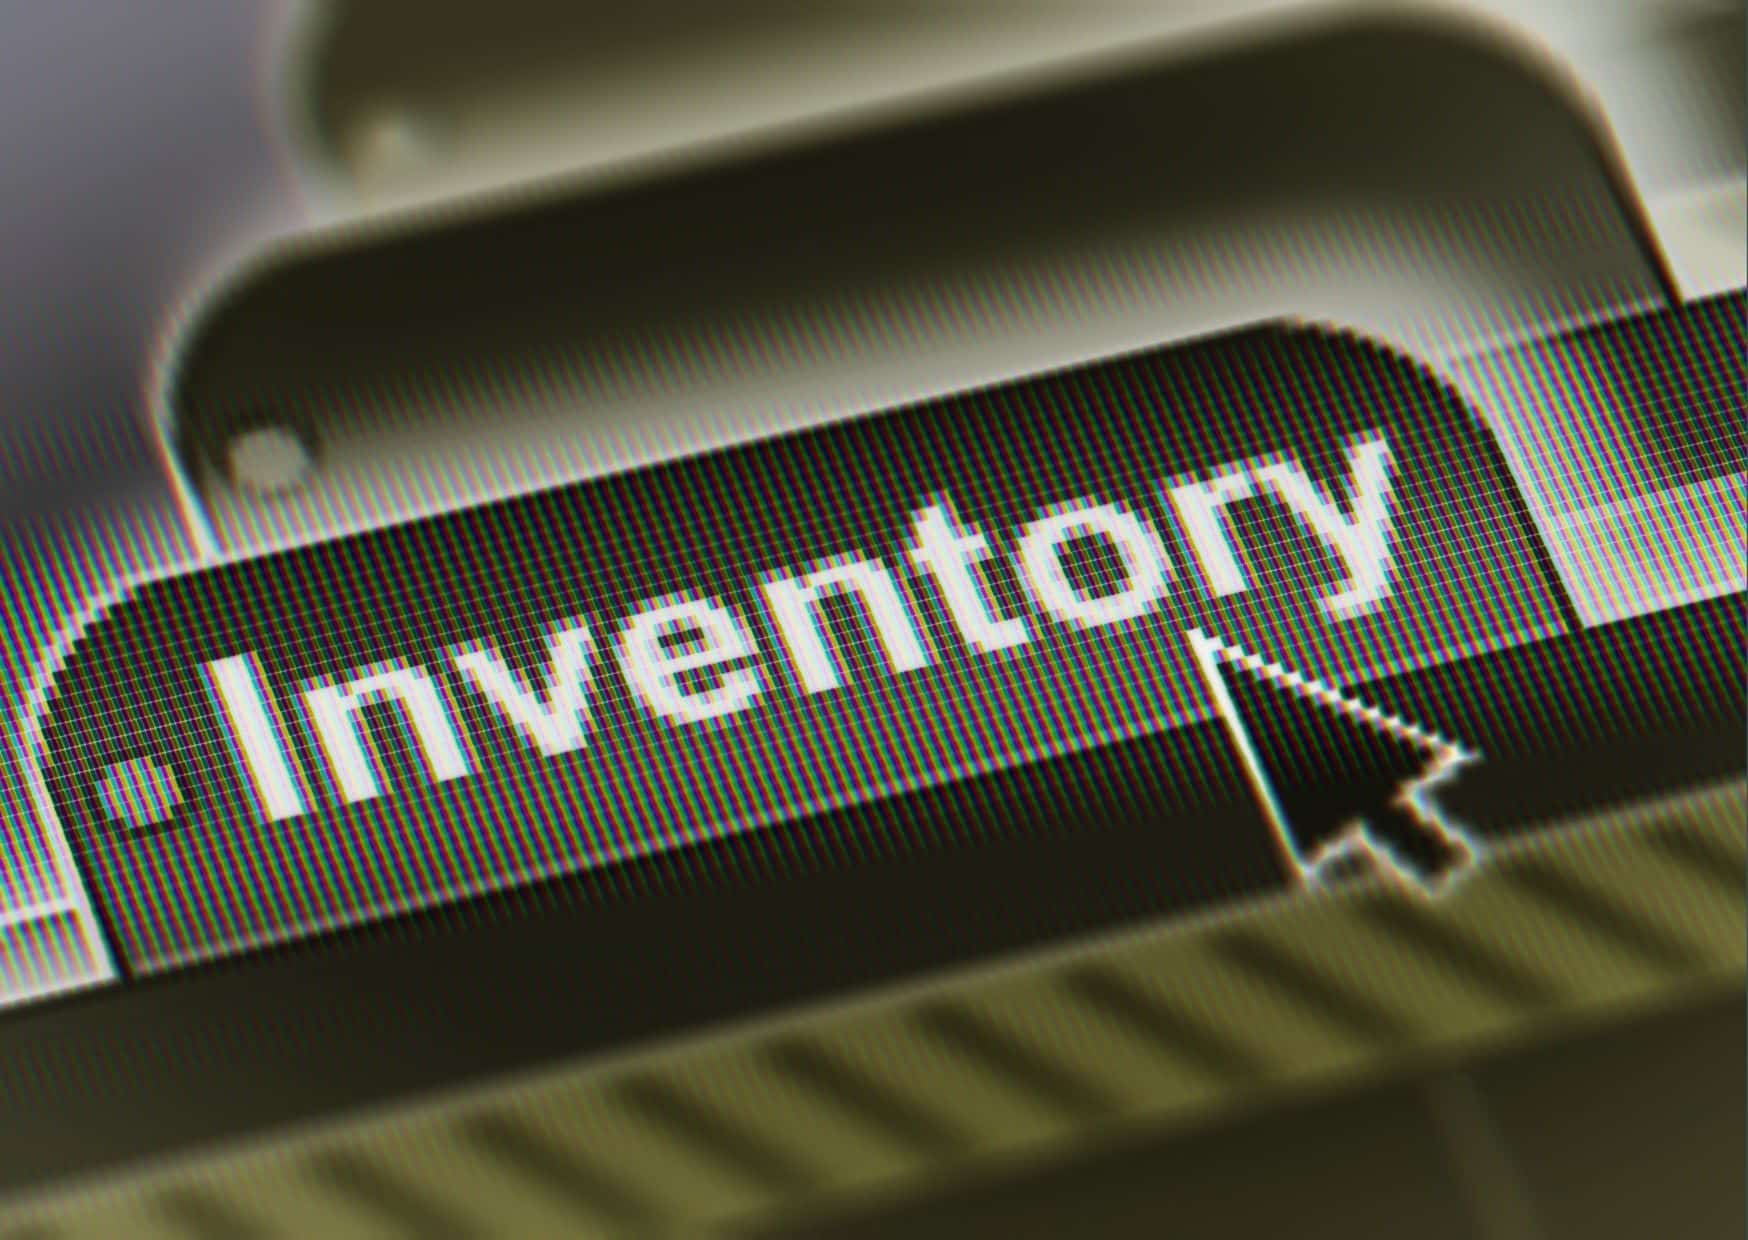 inventory software is